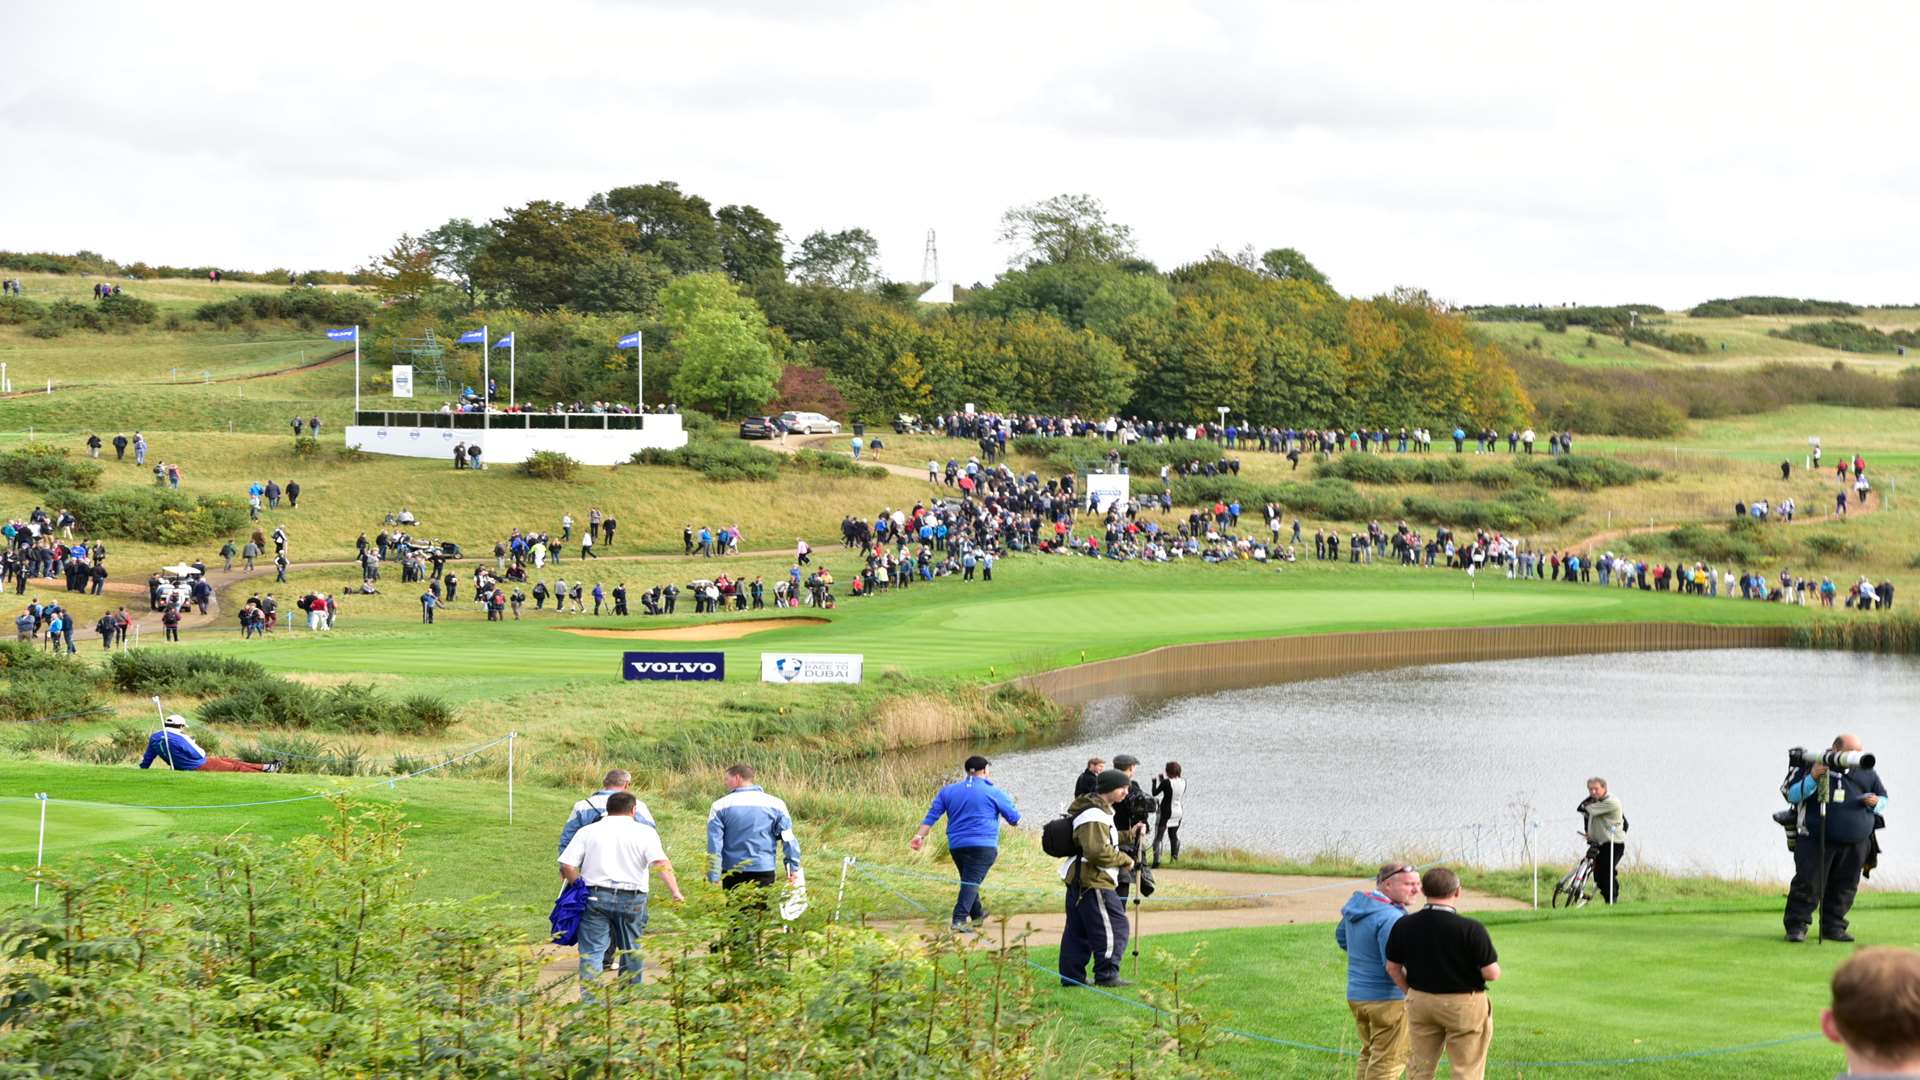 There were big crowds at The London Club on Thursday Picture: Volvo in Golf